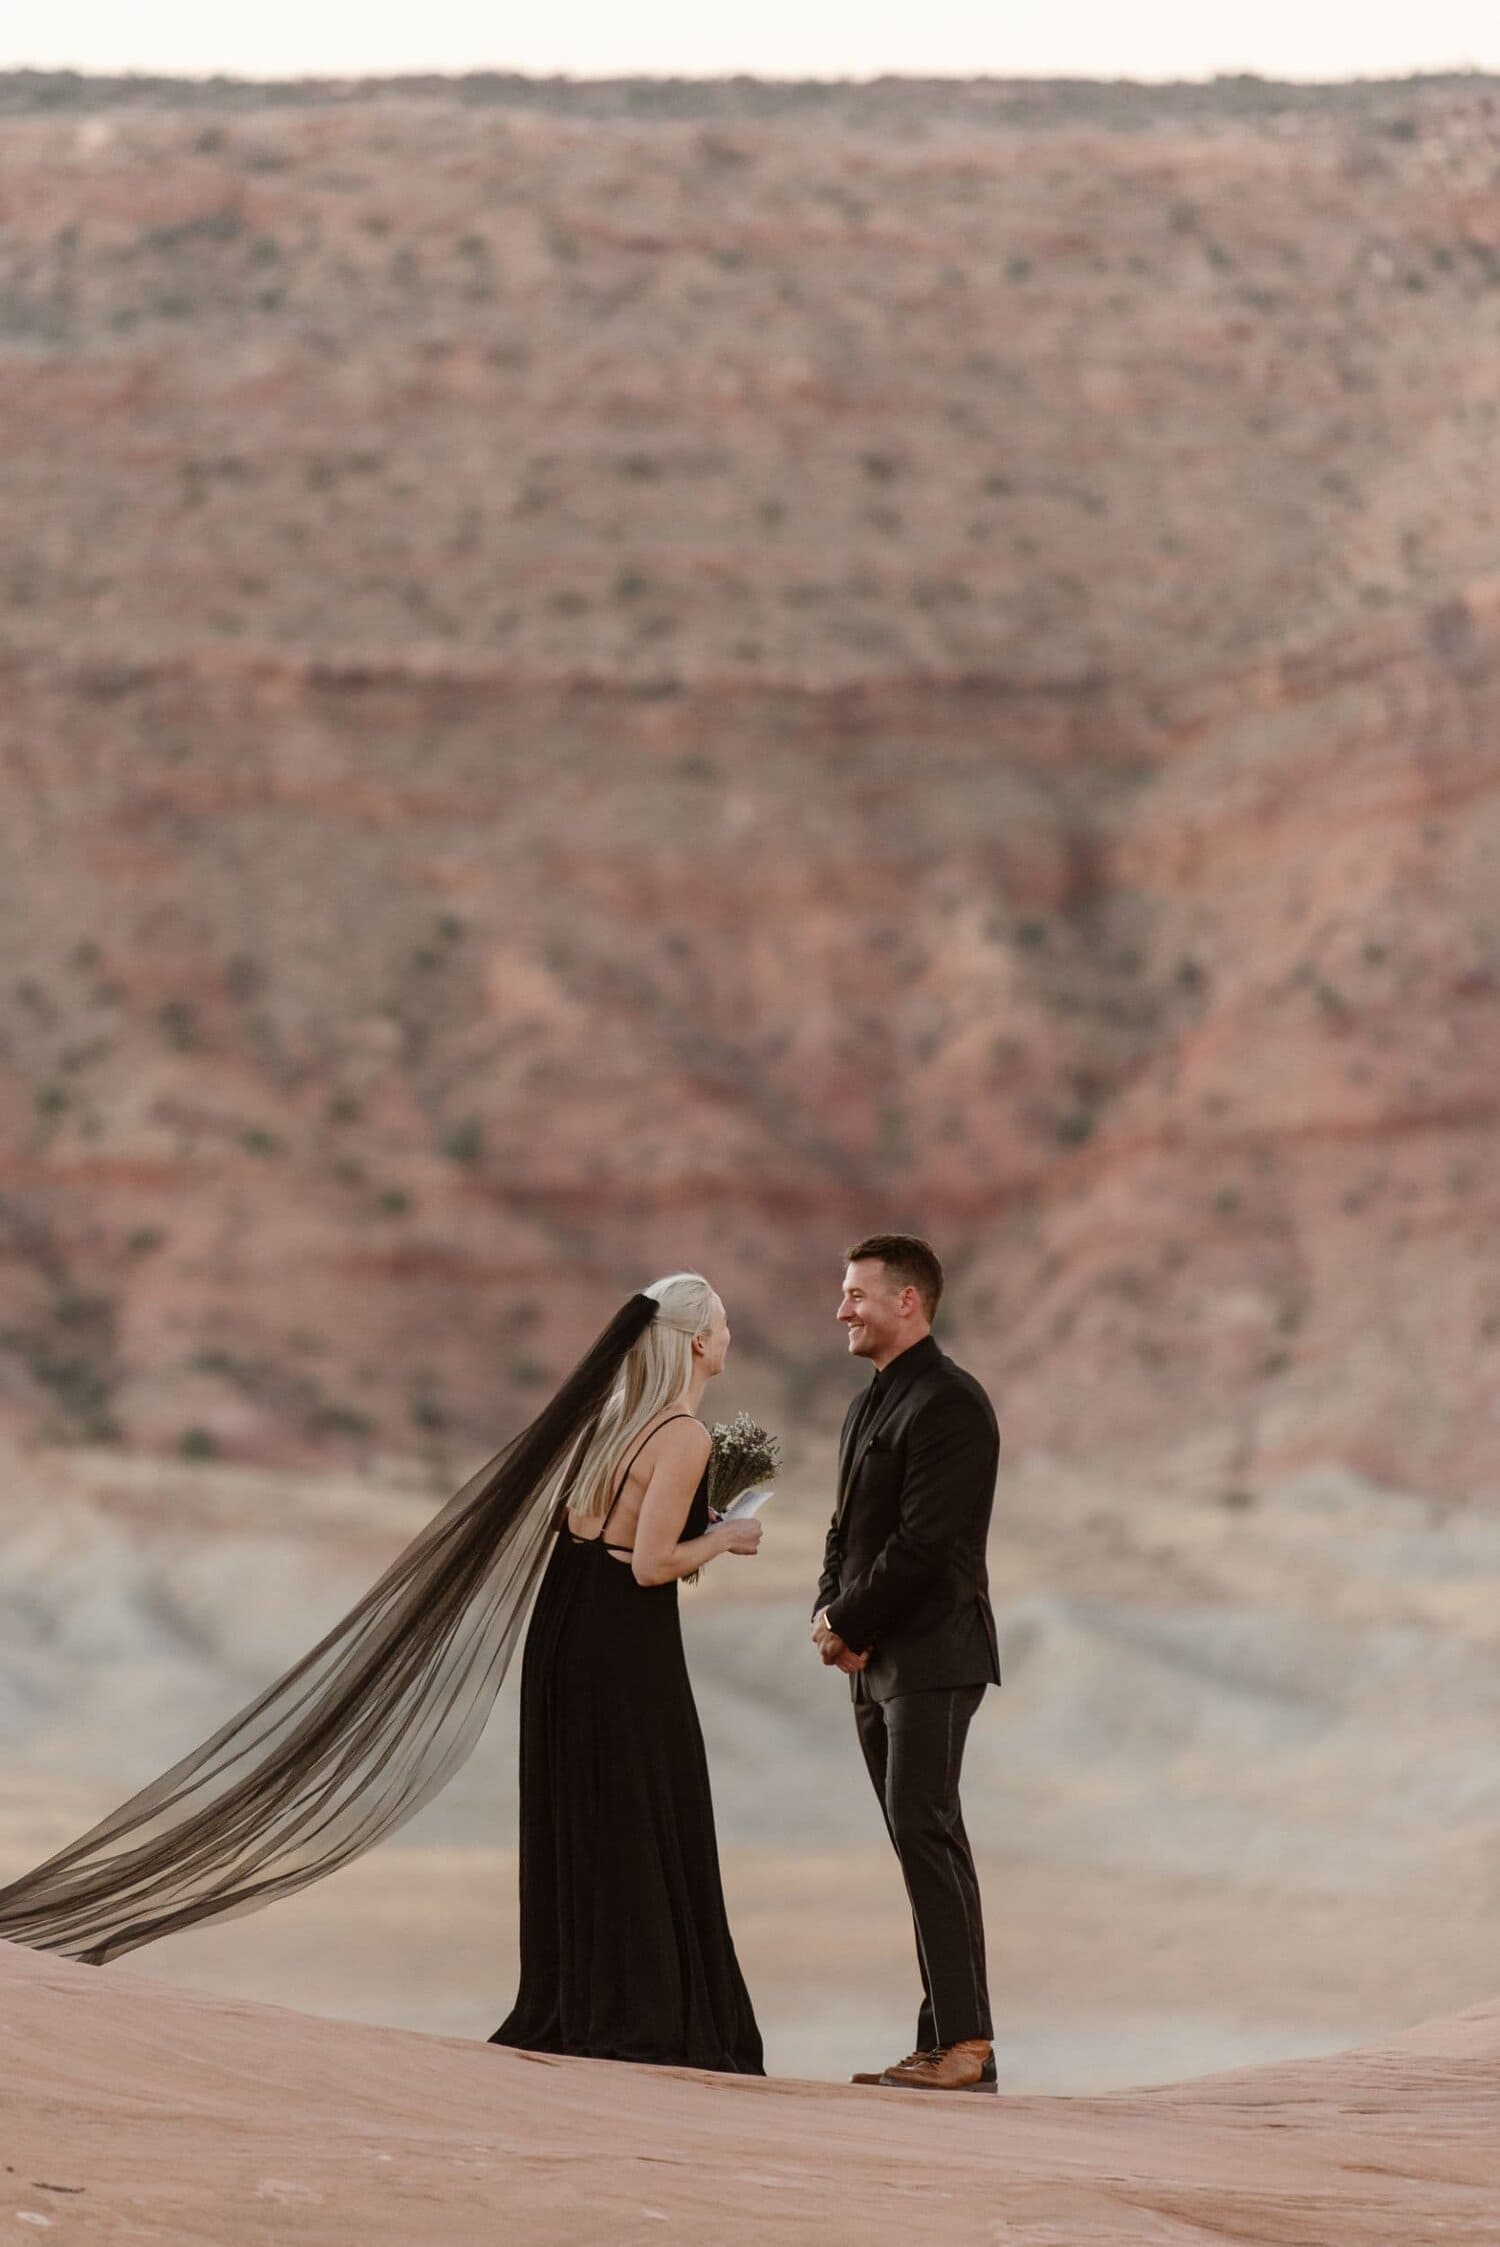 Bride and groom smile at each other during their wedding ceremony in Moab, Utah. They are wearing black wedding attire.